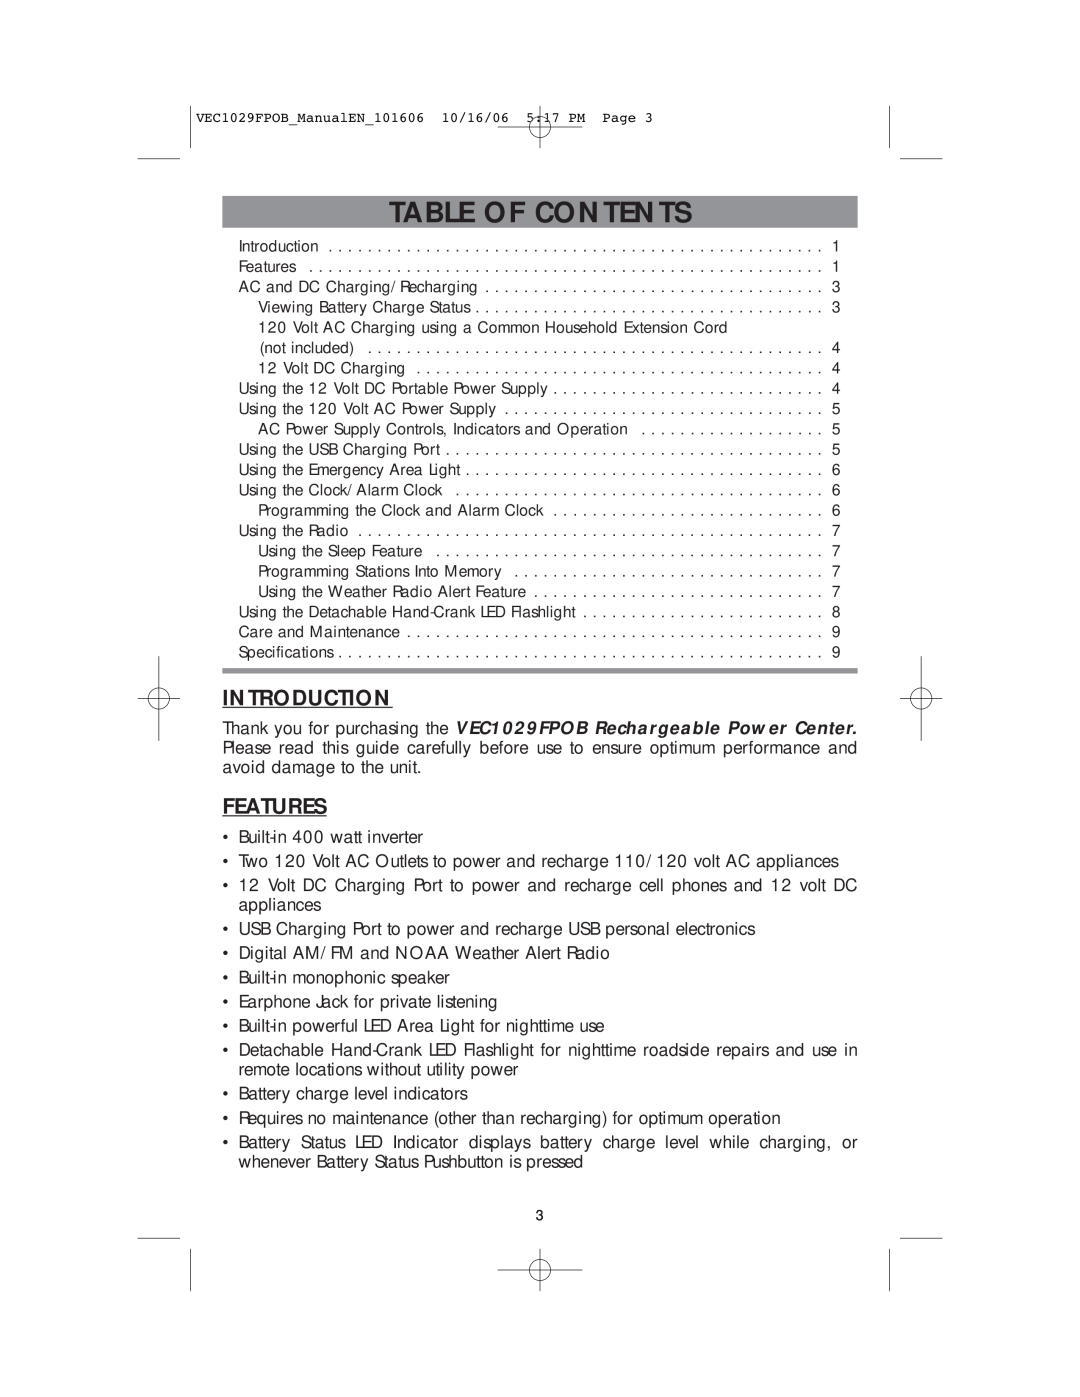 Energy Tech Laboratories VEC1029FPOB user manual Introduction, Features, Table Of Contents 